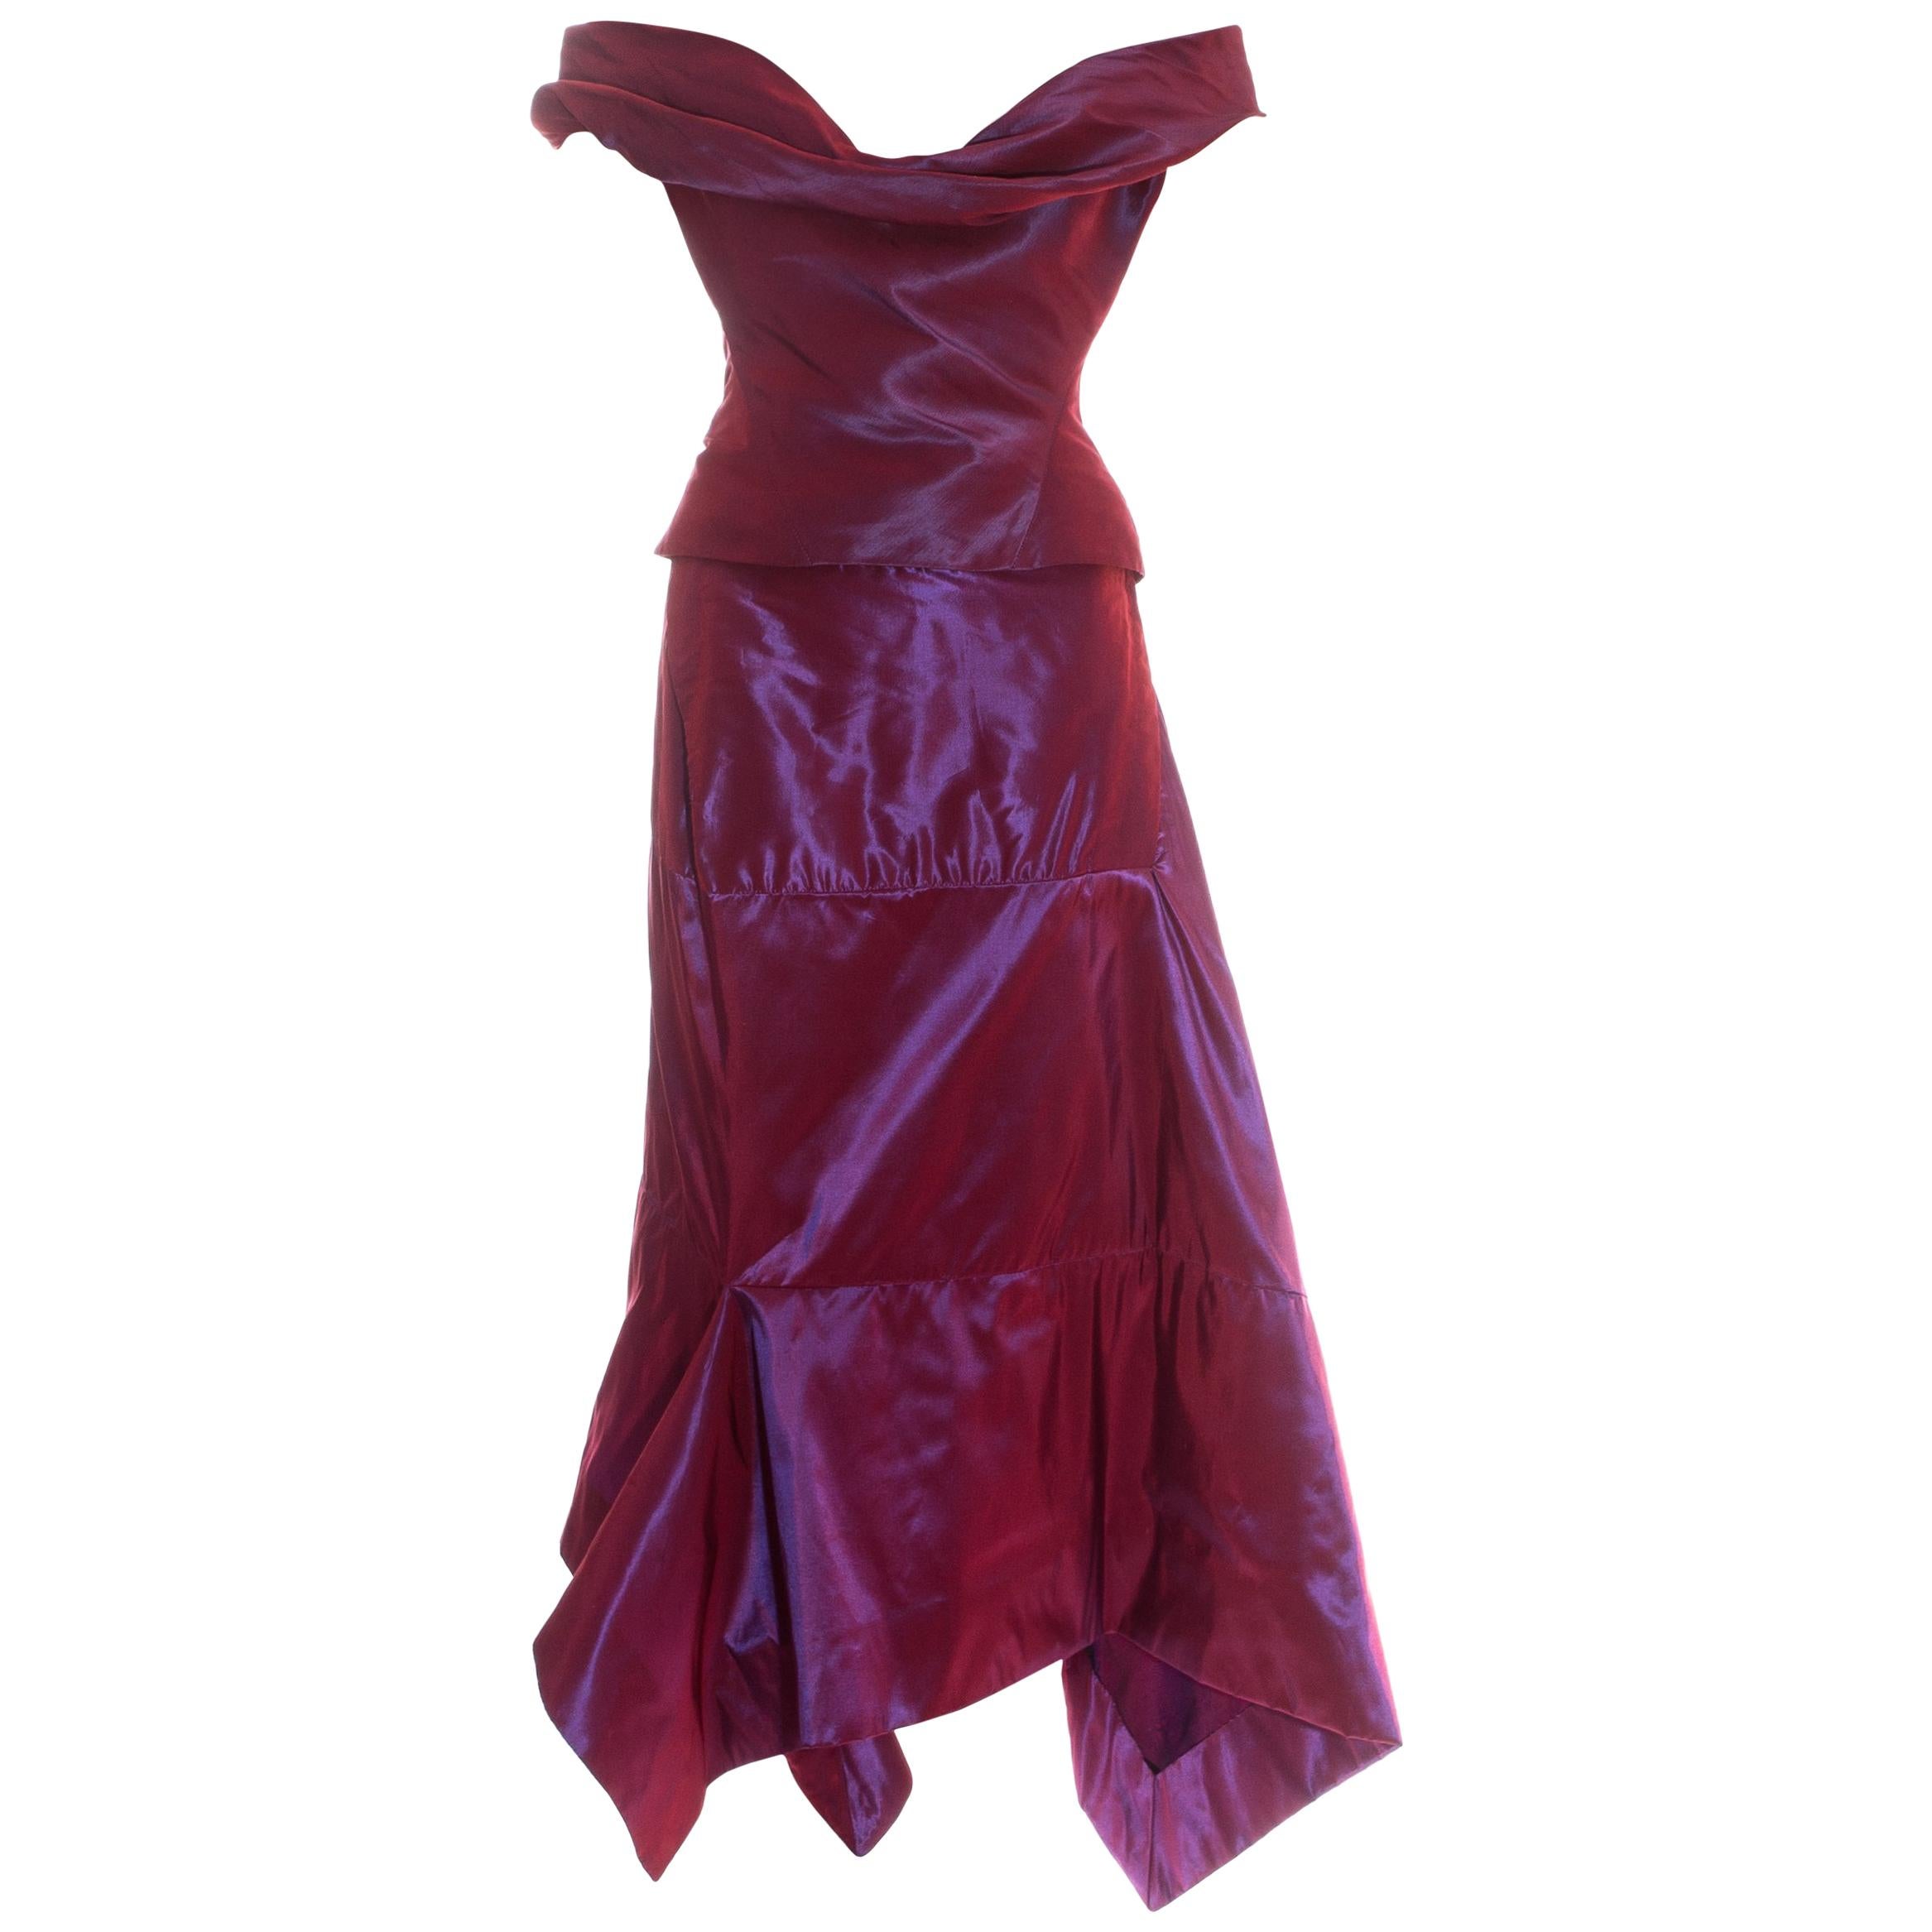 Vivienne Westwood couture purple iridescent taffeta corset and skirt, c. 1990s For Sale